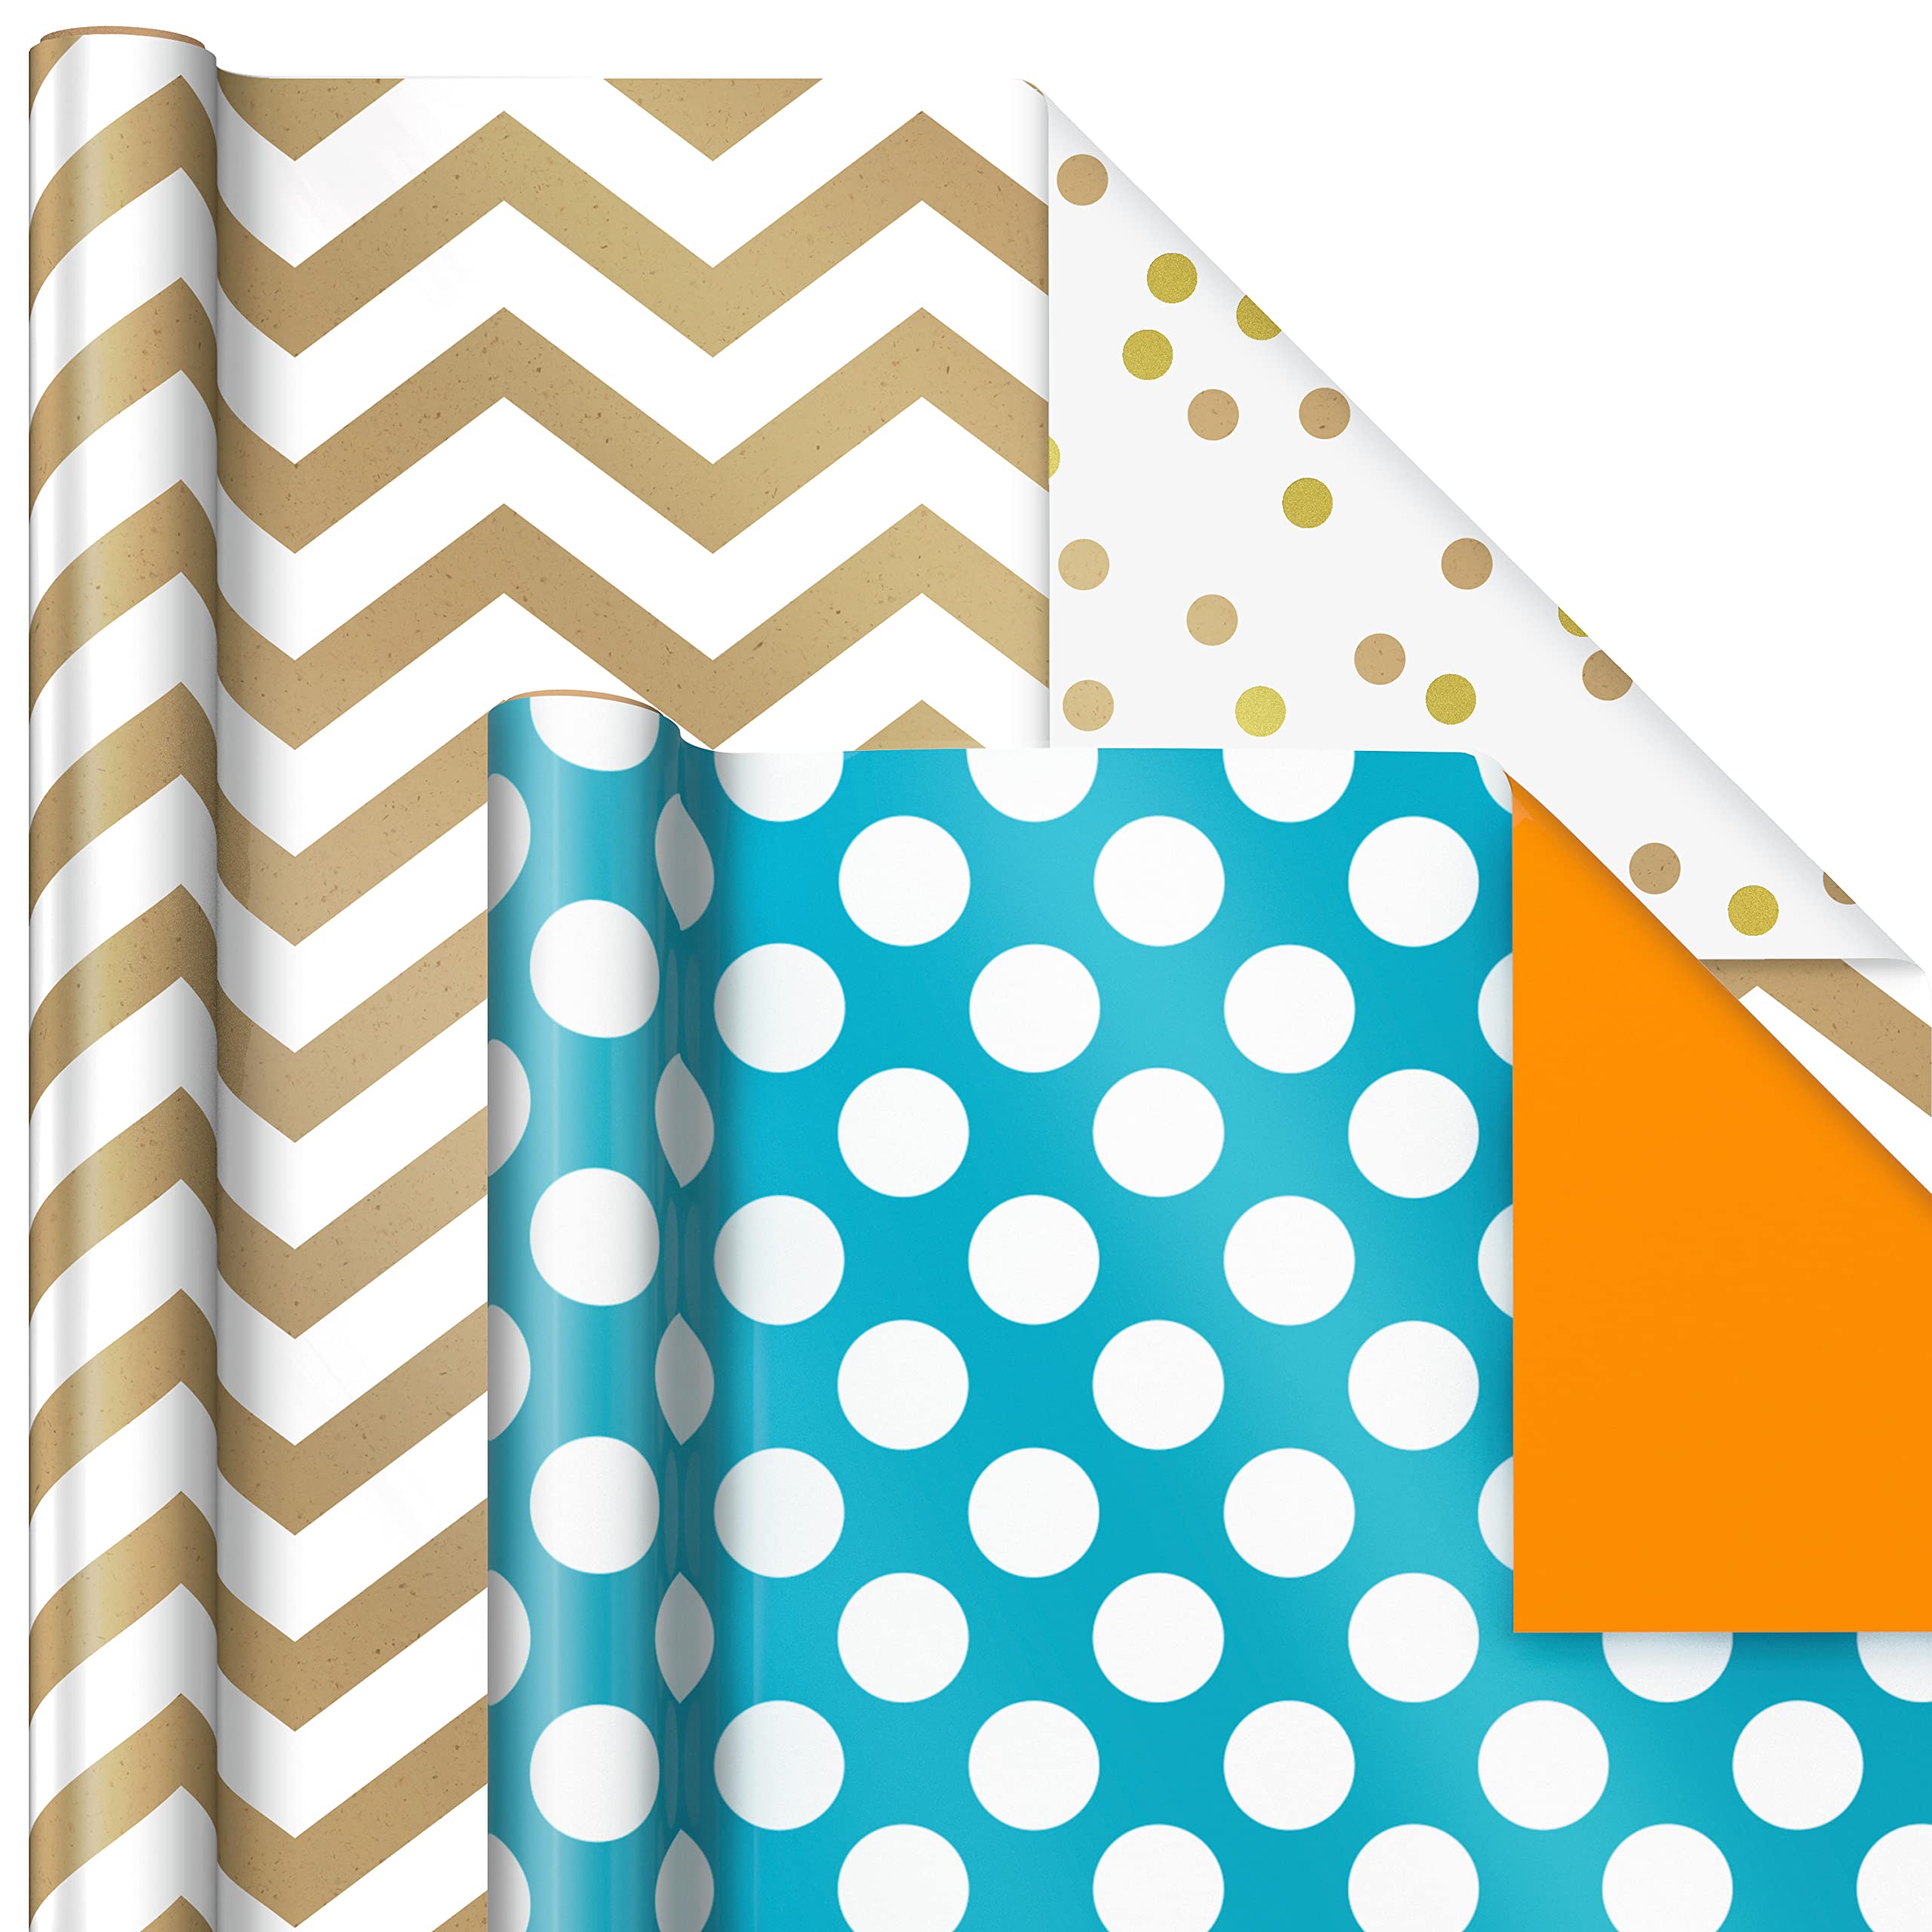 Hallmark Reversible Wrapping Paper Bundle (6 Rolls: 150 Square Feet Total) Stripes, Chevron, Solid, Black & White, Gold, Green, Orange, Blue for Birthdays, Holidays, Any Occasion